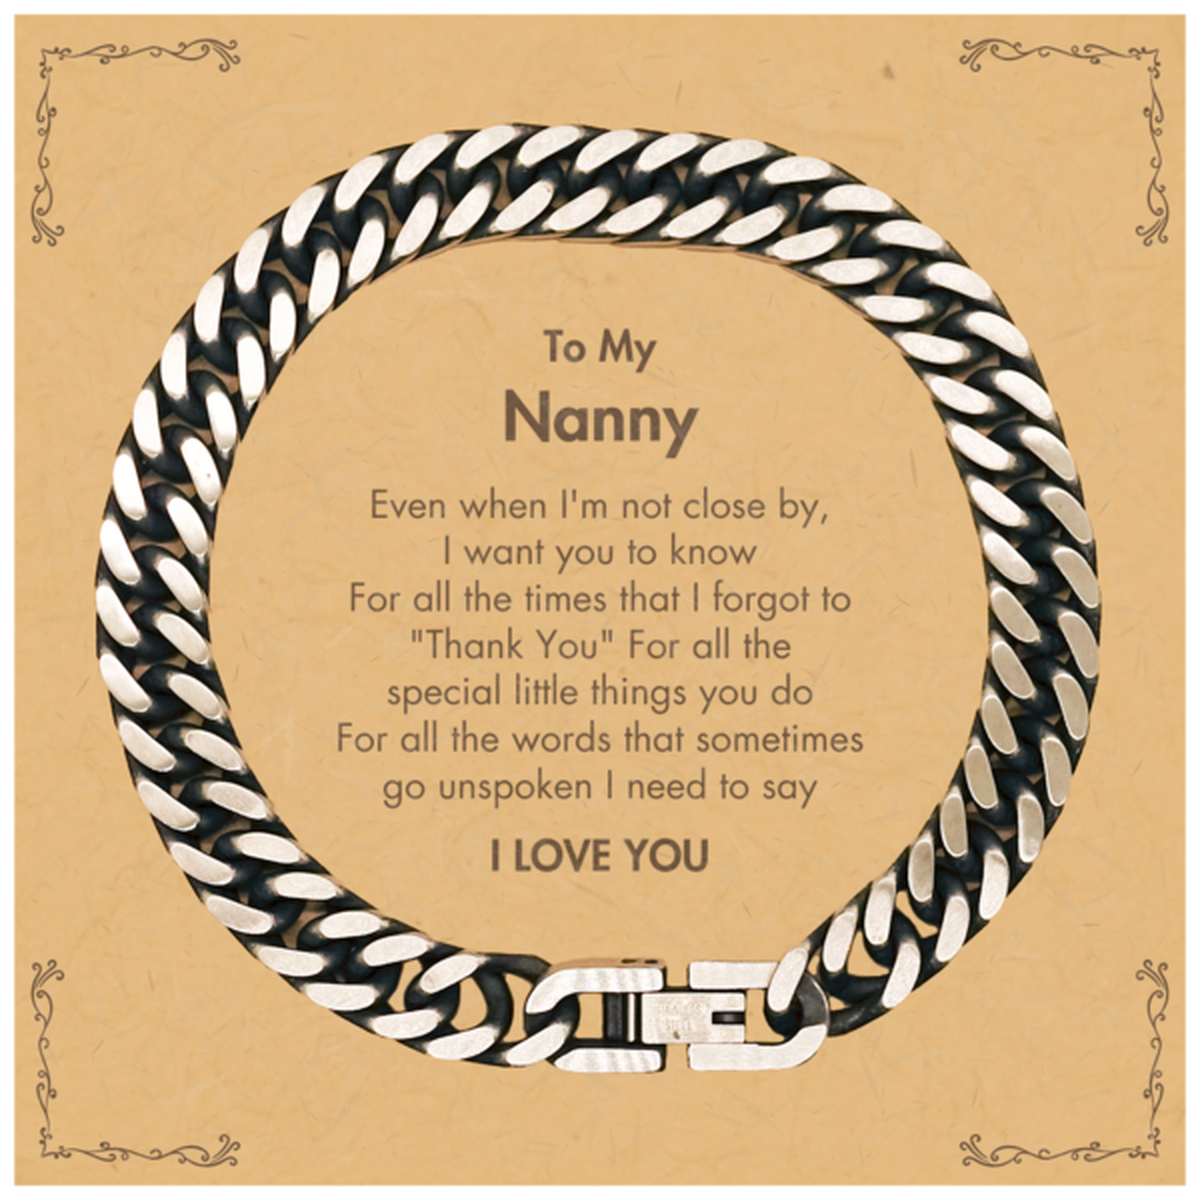 Thank You Gifts for Nanny, Keepsake Cuban Link Chain Bracelet Gifts for Nanny Birthday Mother's day Father's Day Nanny For all the words That sometimes go unspoken I need to say I LOVE YOU